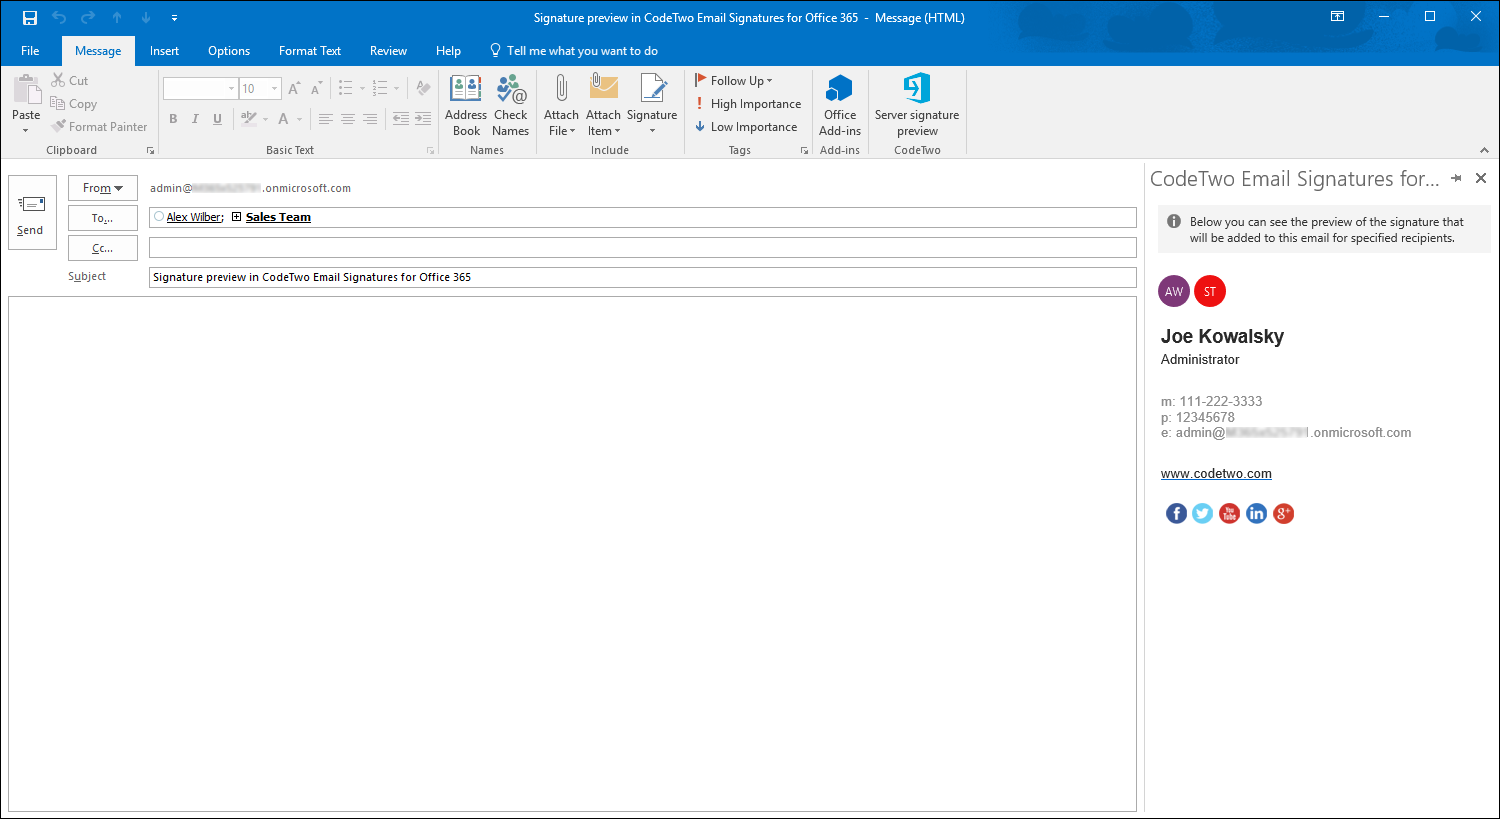 Signature management - Signature preview in Outlook ...